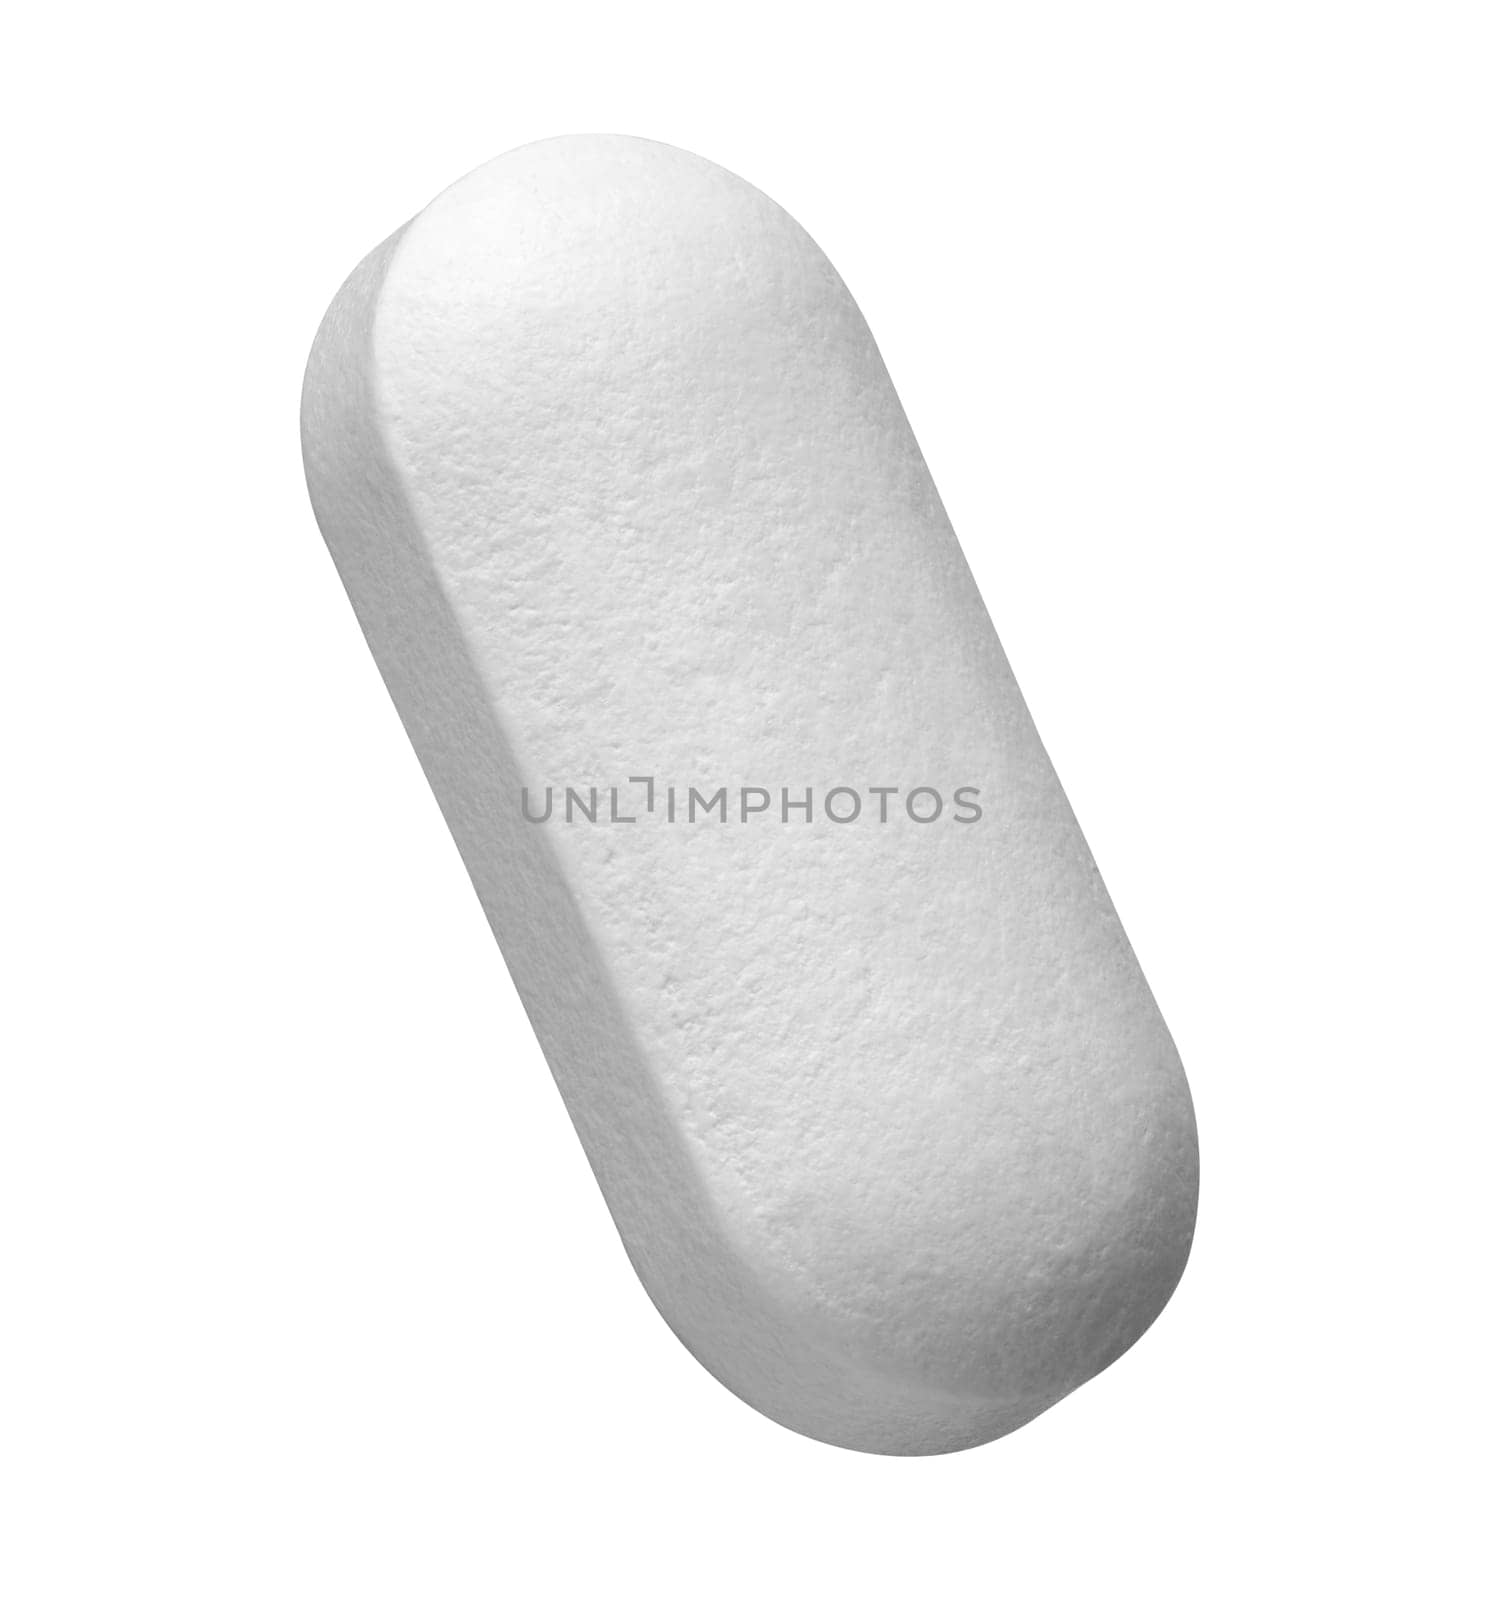 white pill medical drug medication by Picsfive